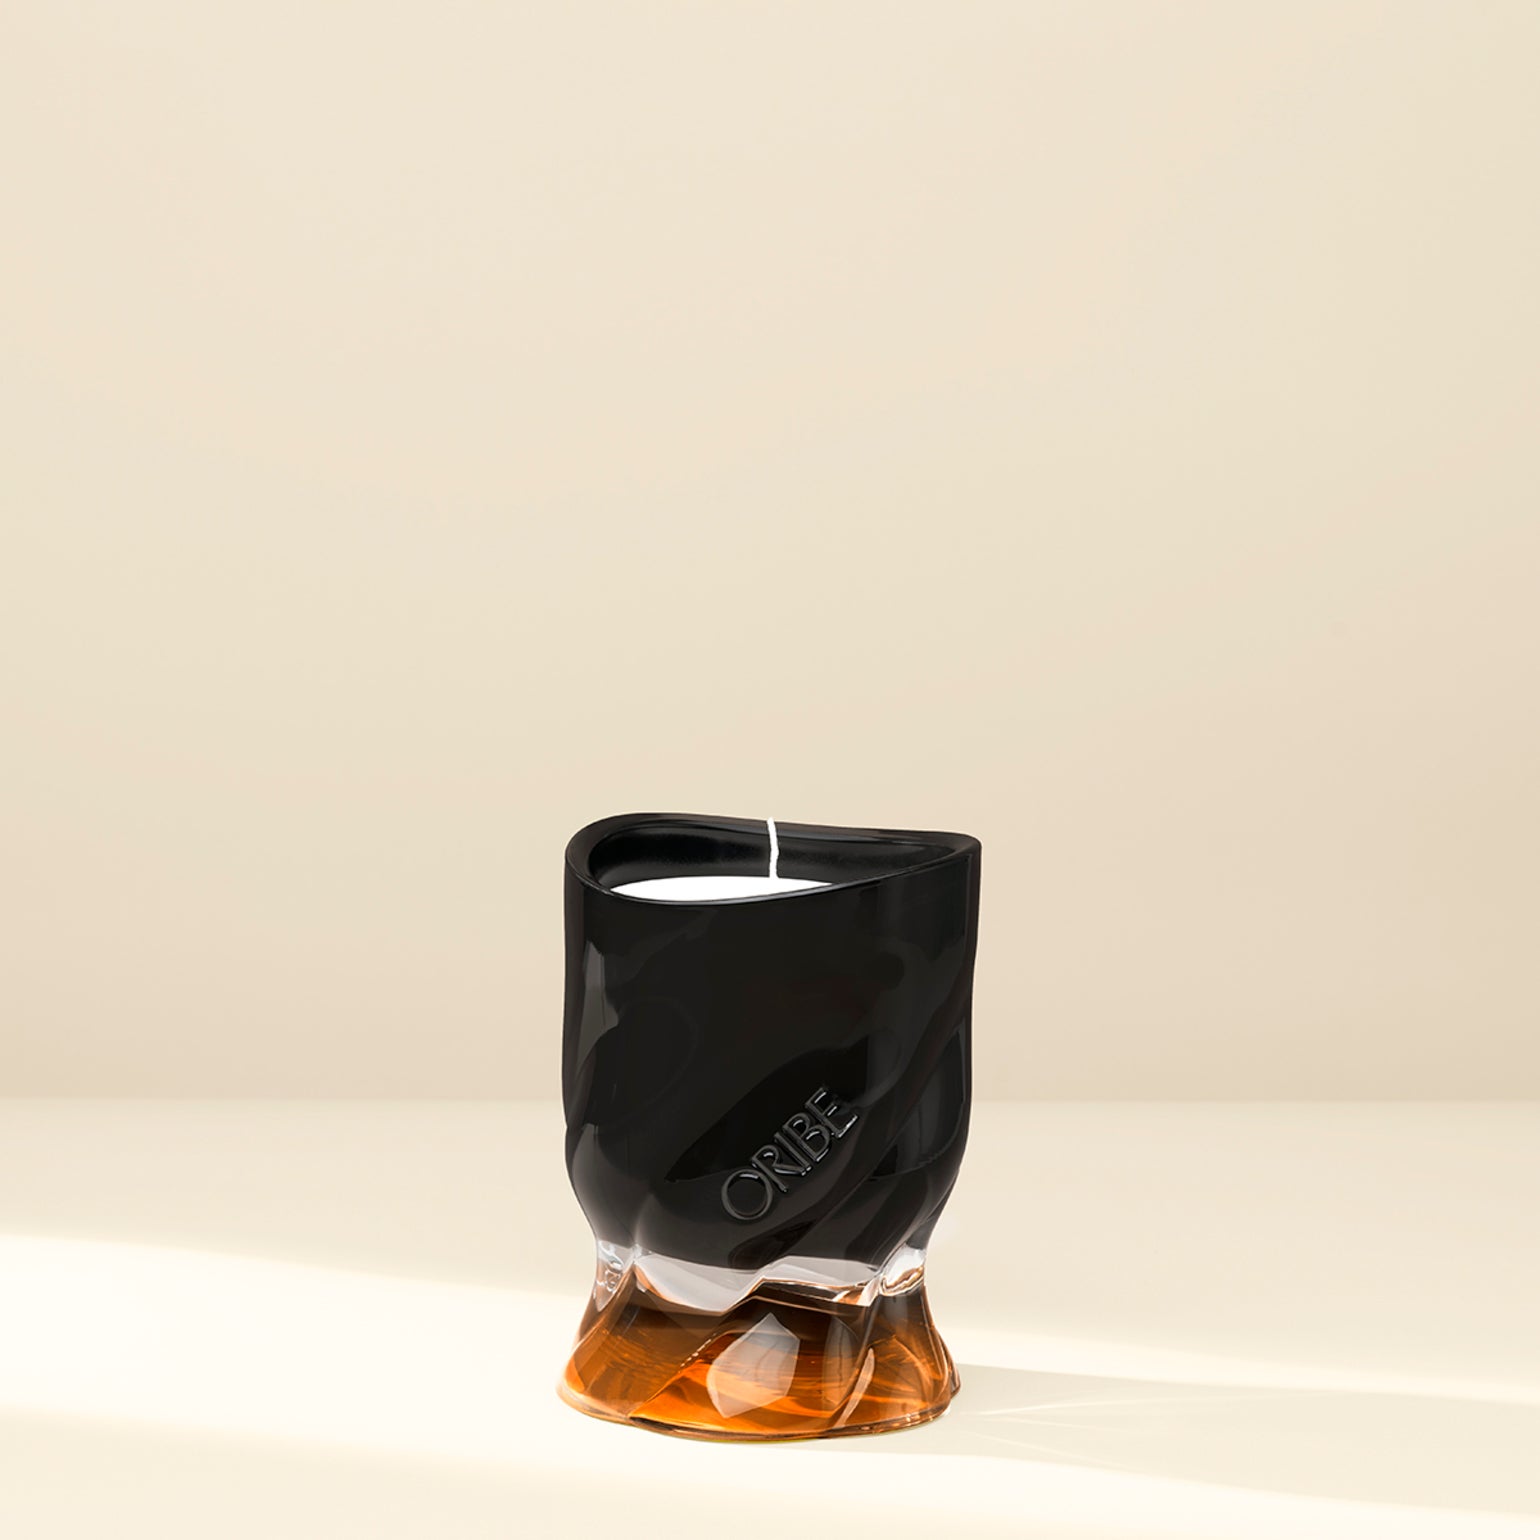 Black Oribe candle against a white background.